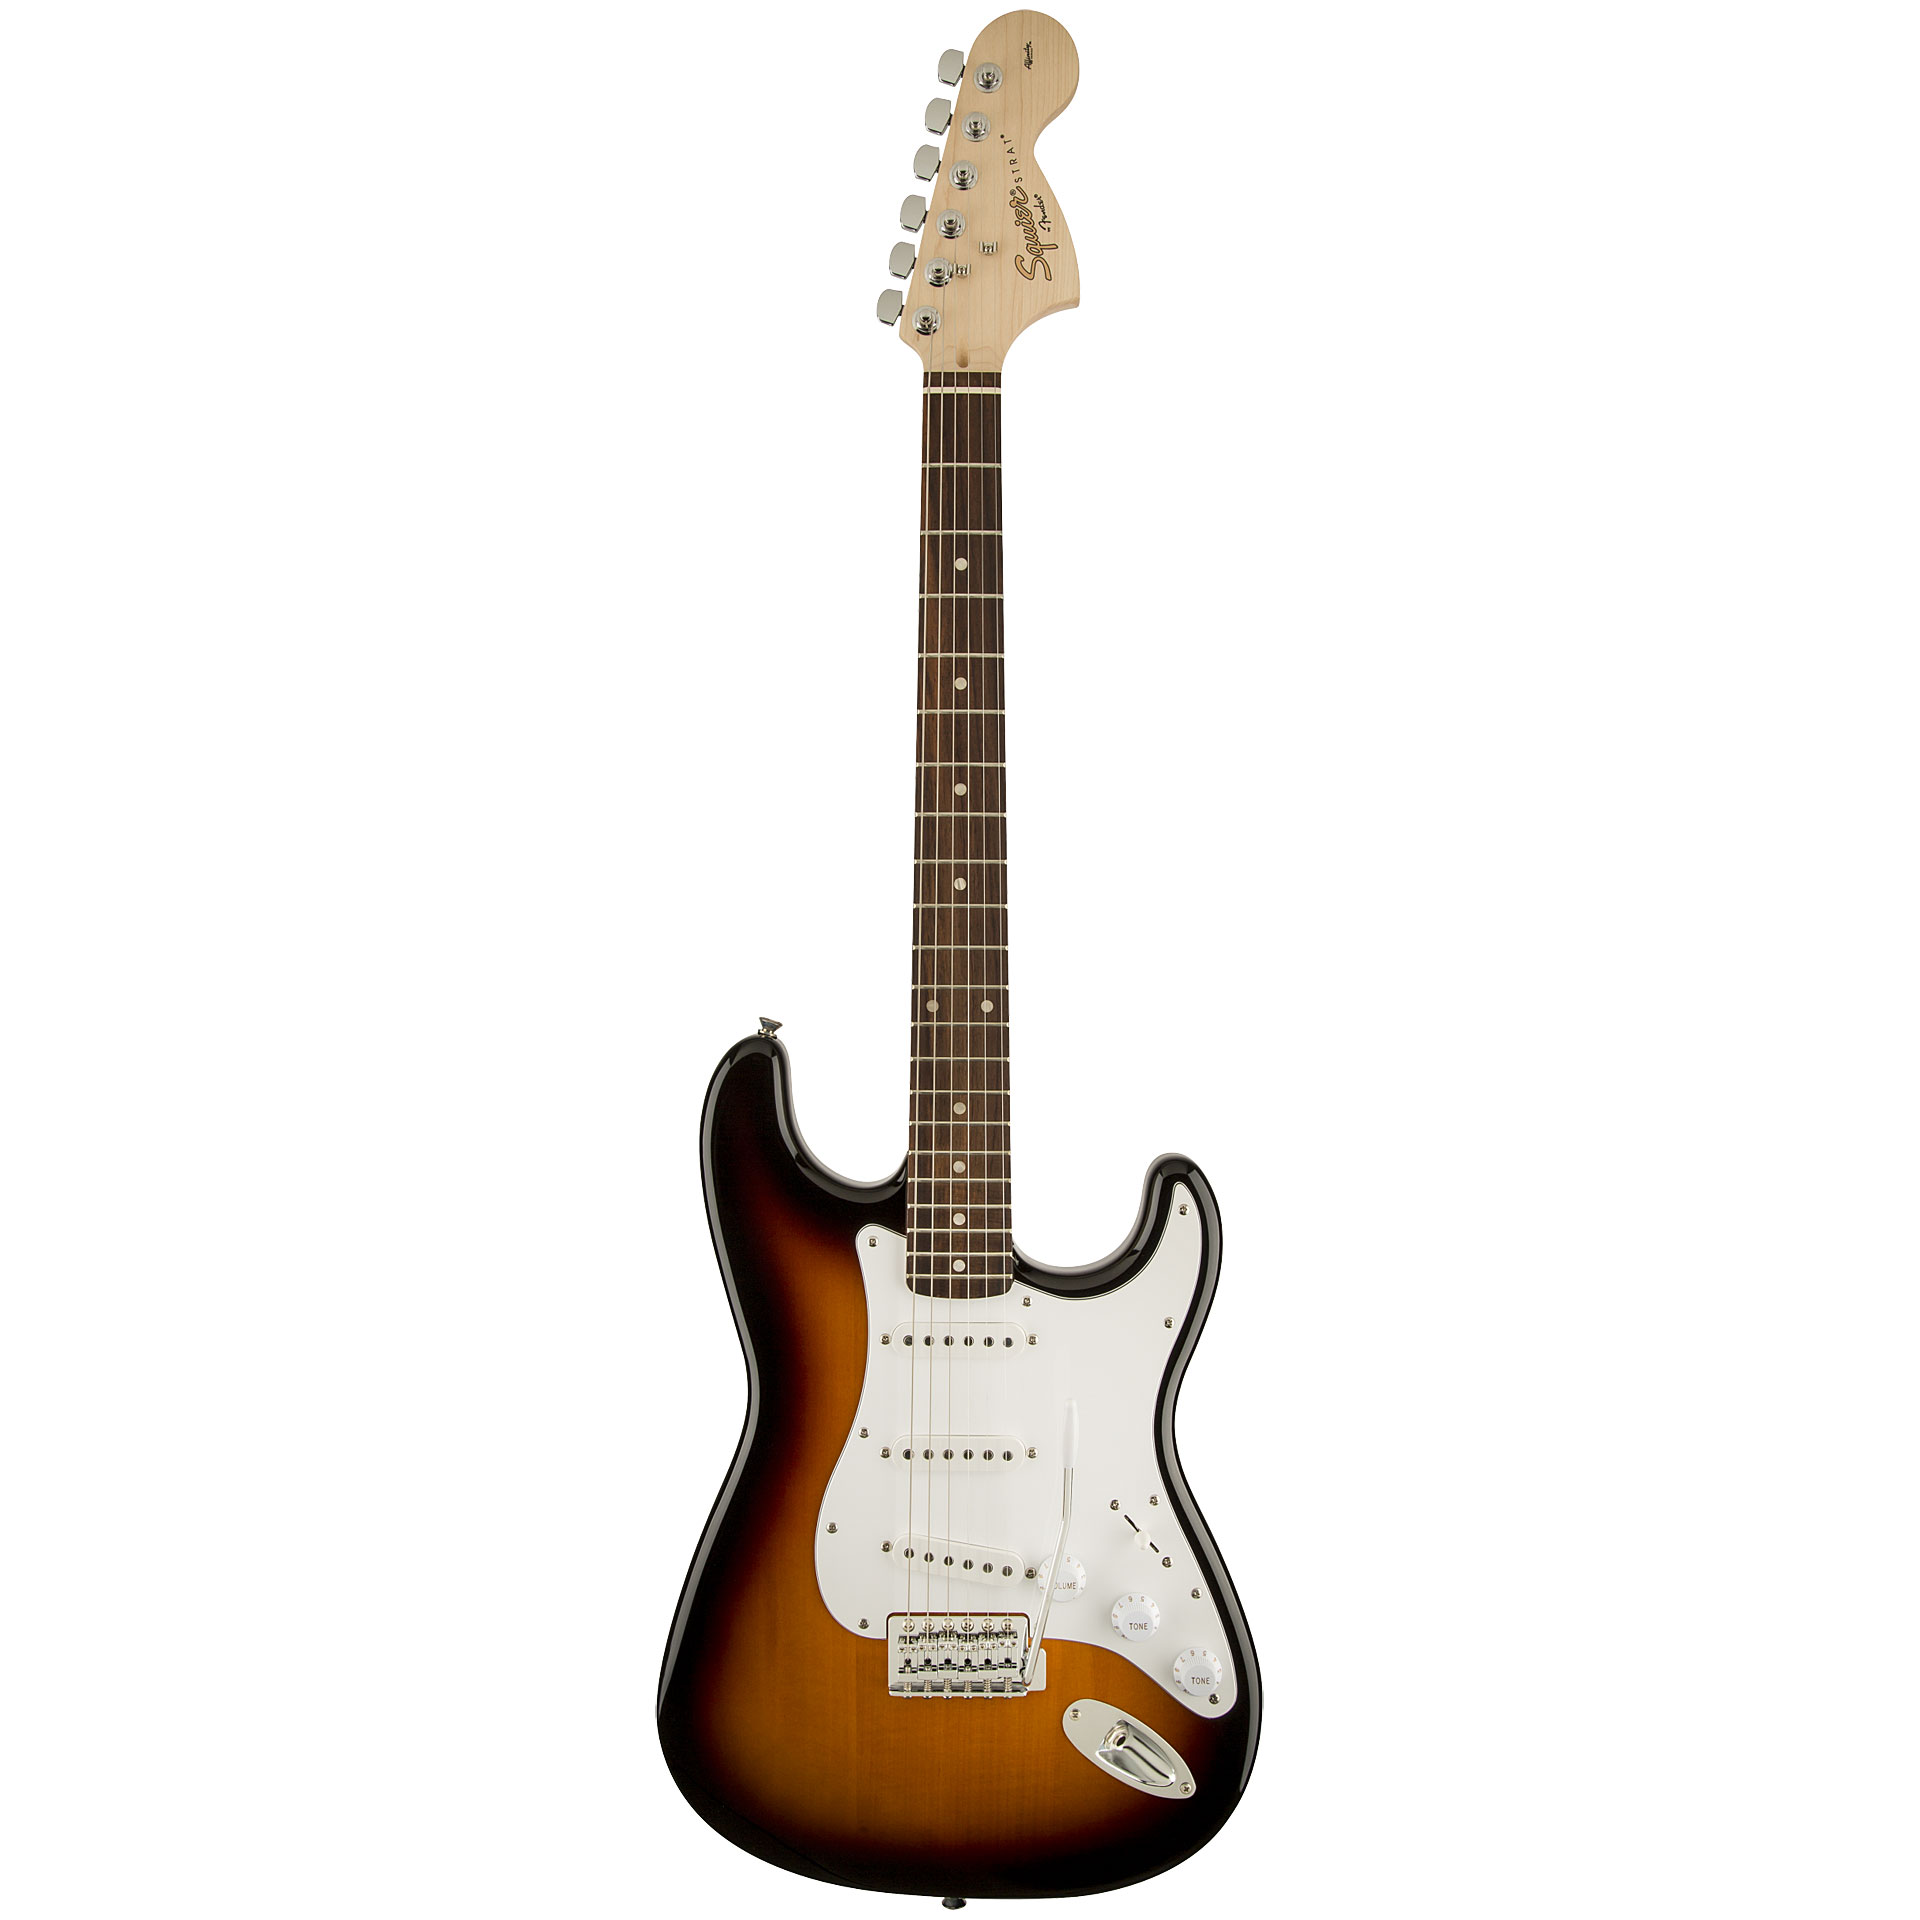 Fender Squire Affinity Starcaster